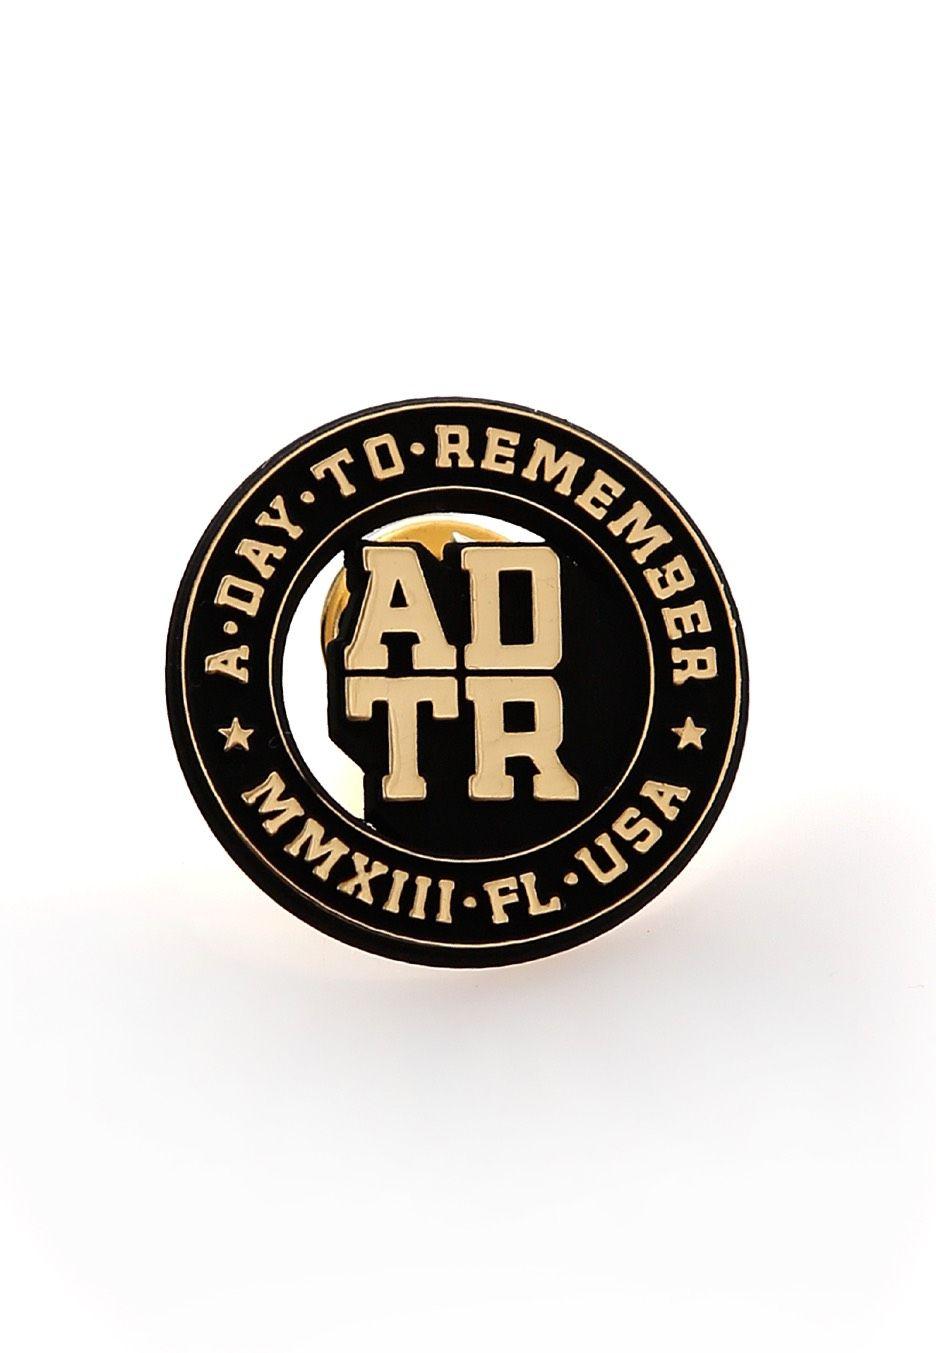 A Day to Remember Logo - A Day To Remember - Bad Vibrations - Pin - Official Melodic Hardcore ...